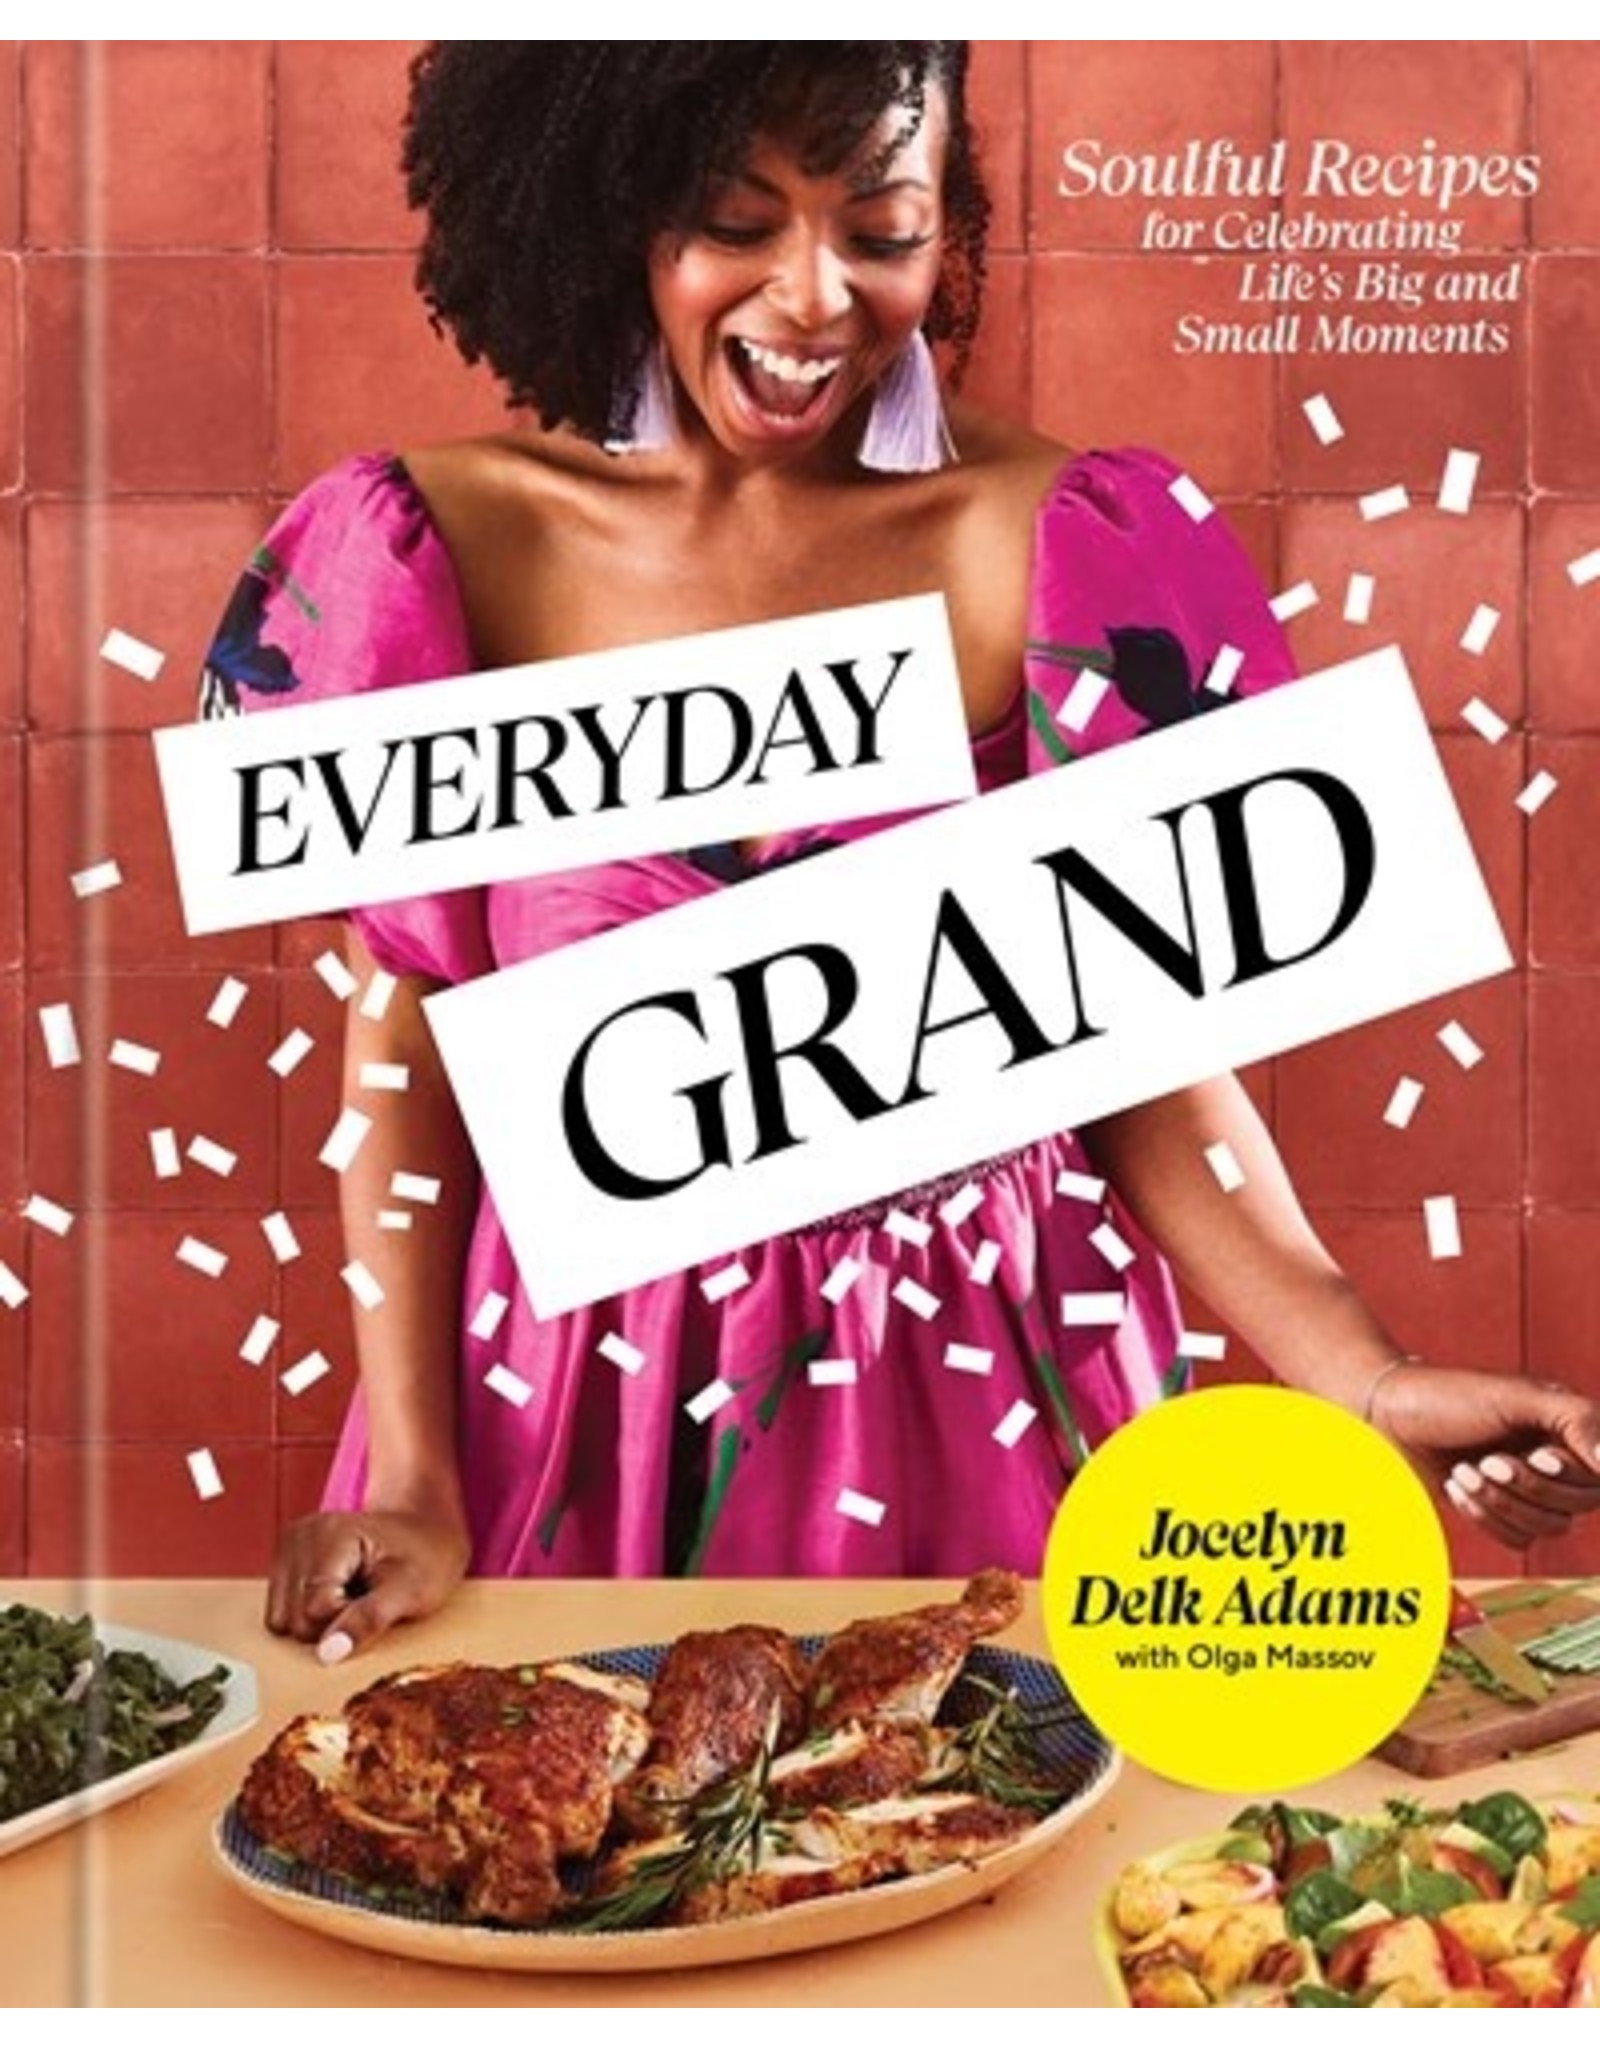 Books Everyday GRAND : Soulful Recipes for Celebrating Life's Big and Small Moments by Jocelyn Delk Adams